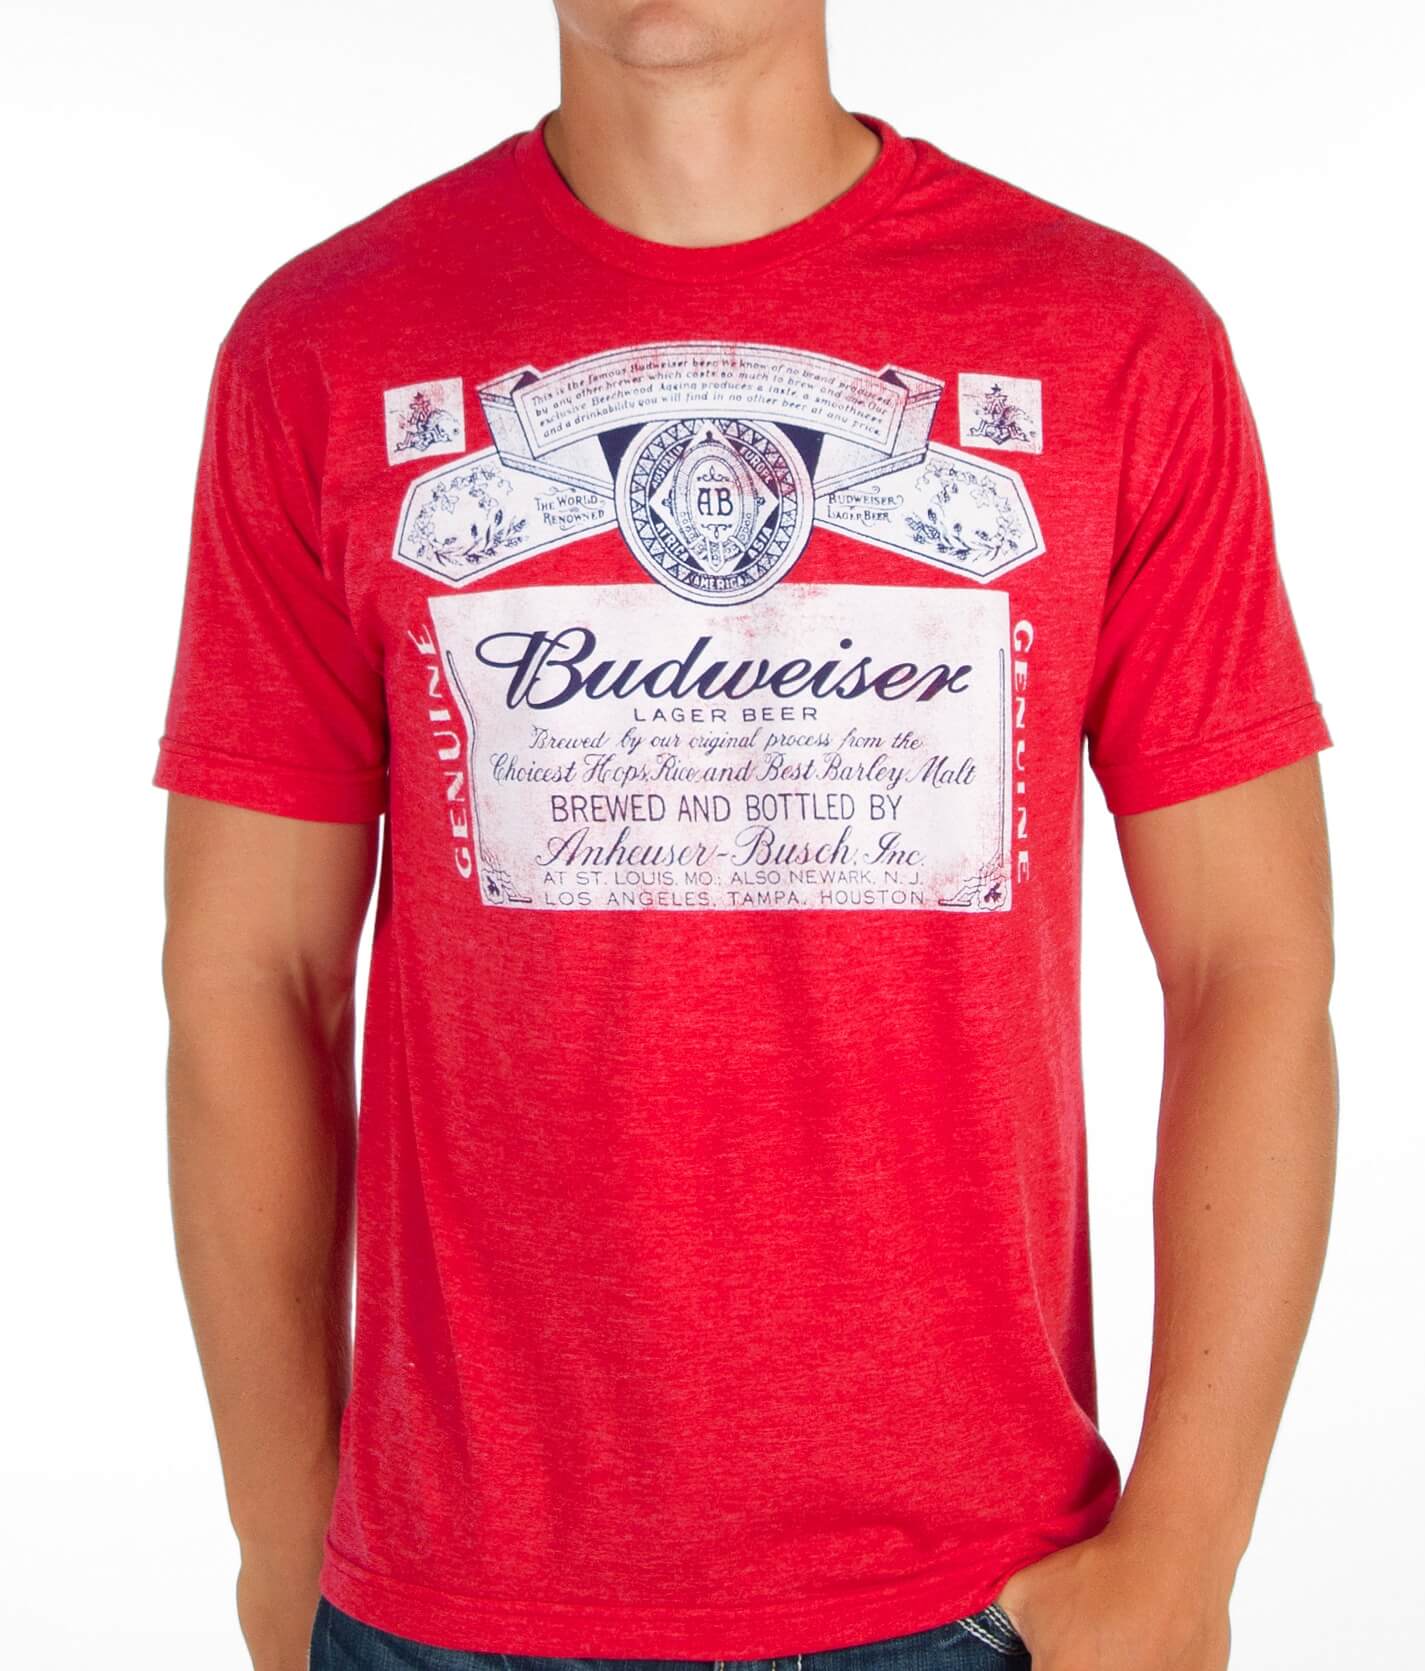 The East Is Ours Braves Vintage Unisex T-shirt - Teeruto